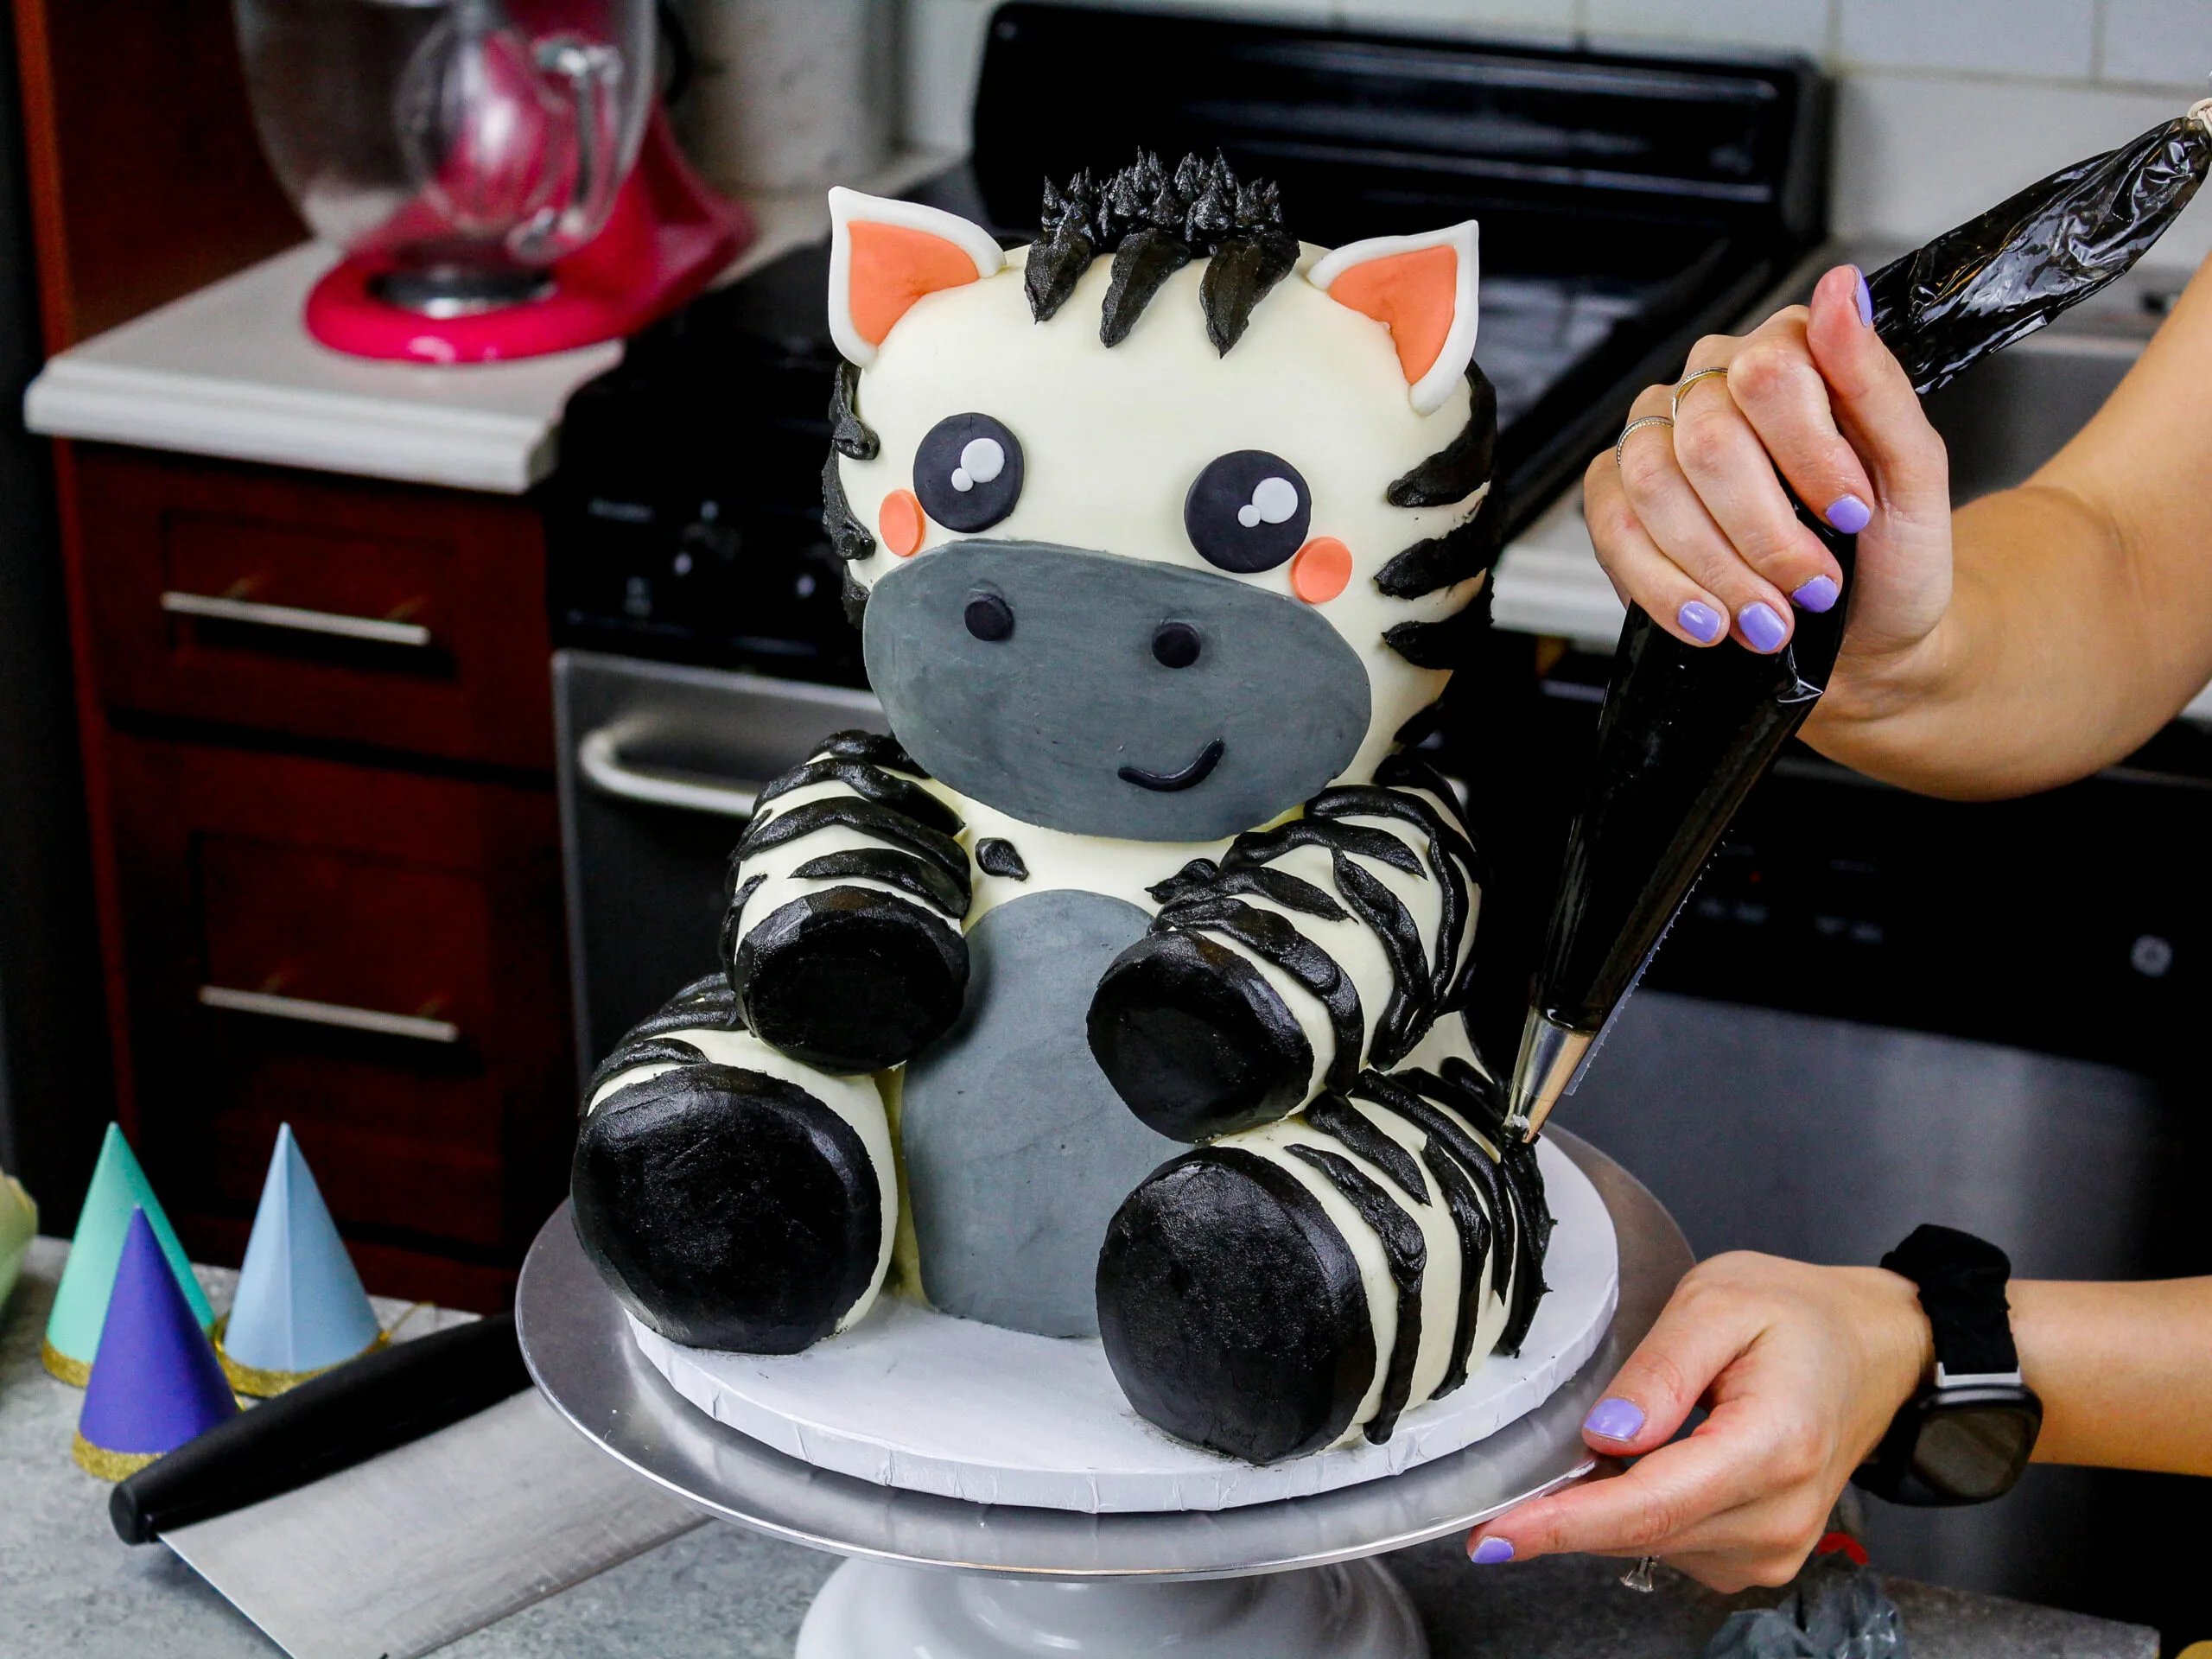 image of black buttercream frosting stripes being piped onto an adorable baby zebra cake made for a birthday party